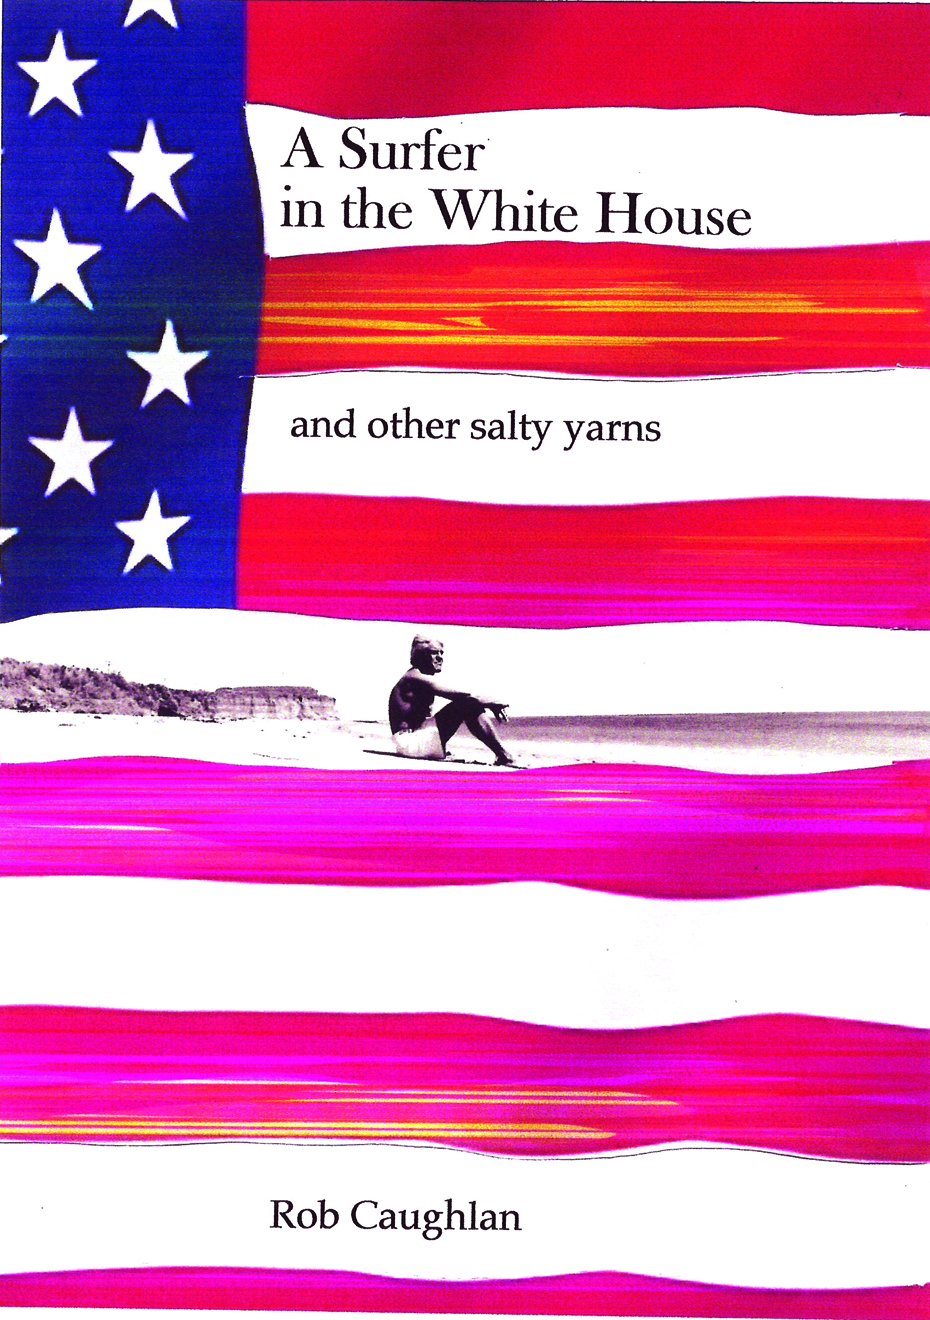 Book cover of Caughlan's book. An American flag is the background with a faded beach scene with a man sitting on the sand.